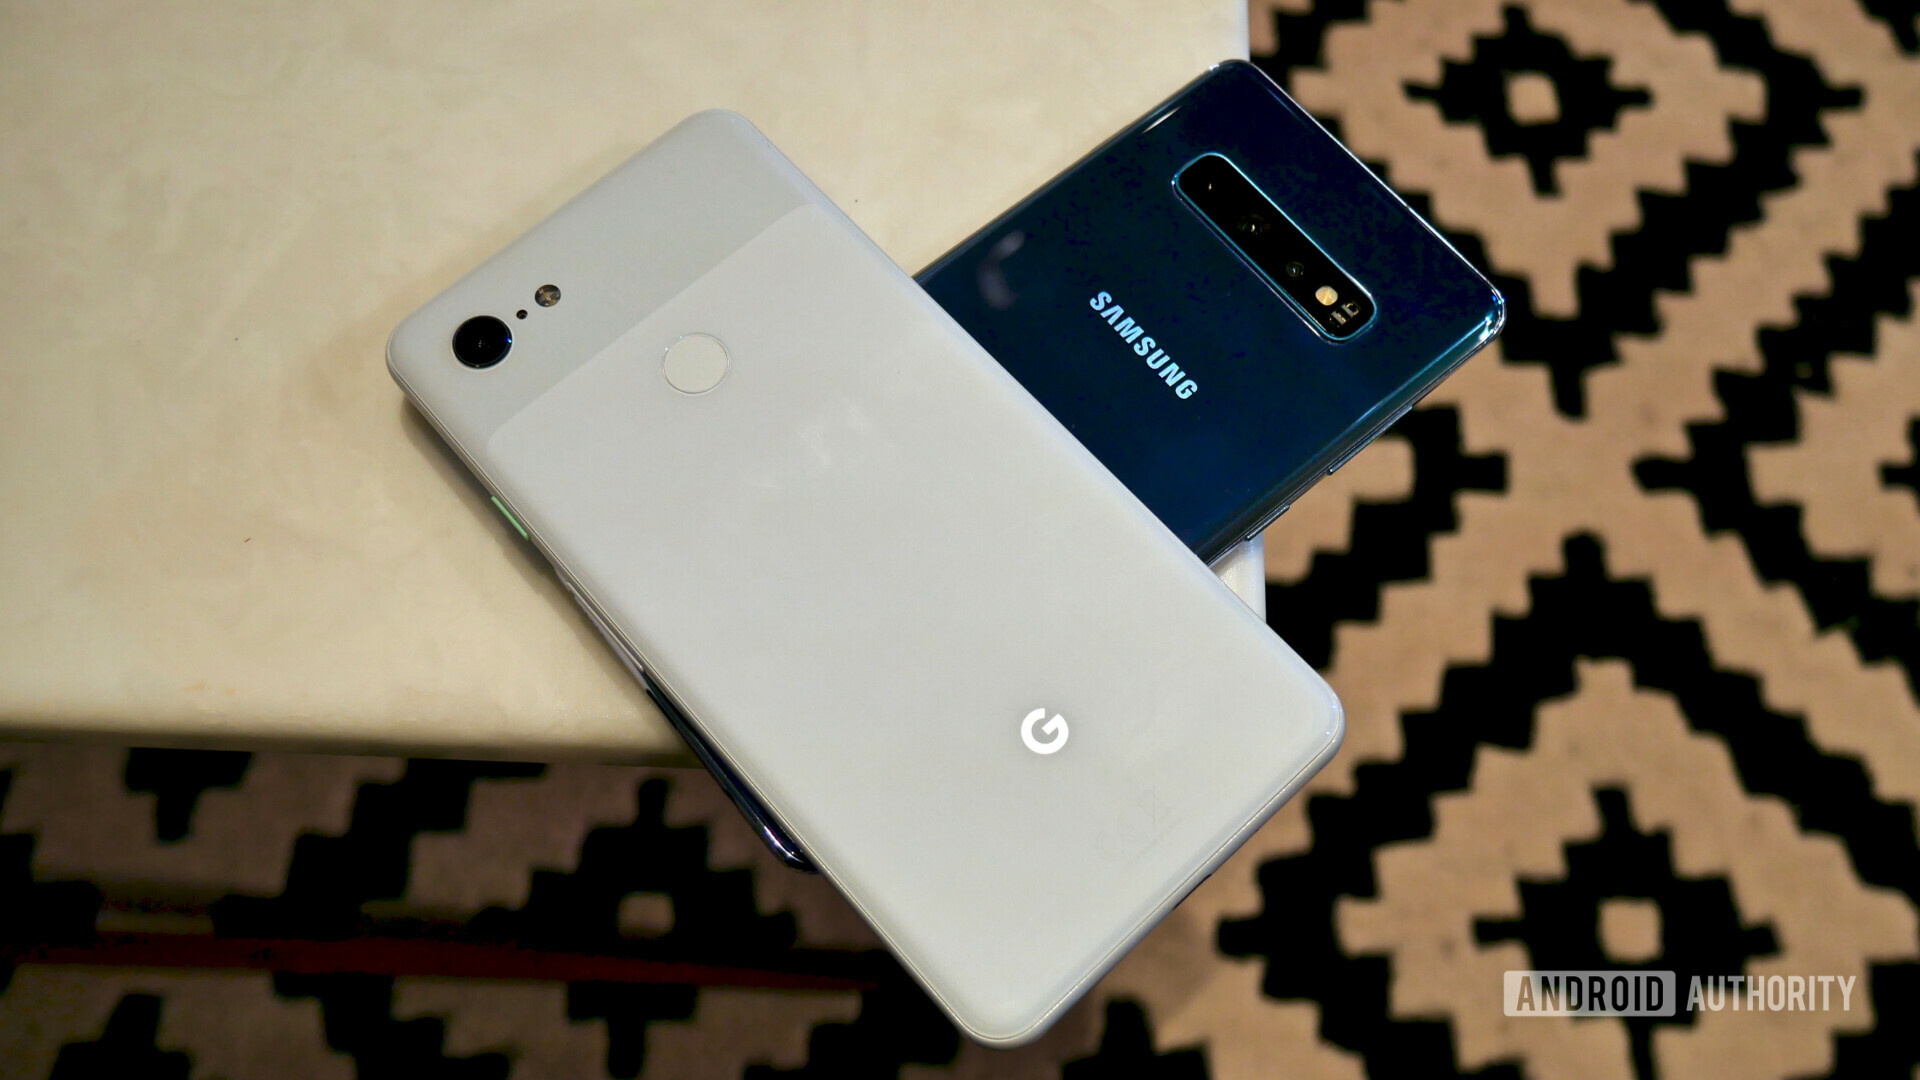 Backside photo of the Samsung Galaxy S10 Plus next to a Google Pixel 3 XL on a white table.